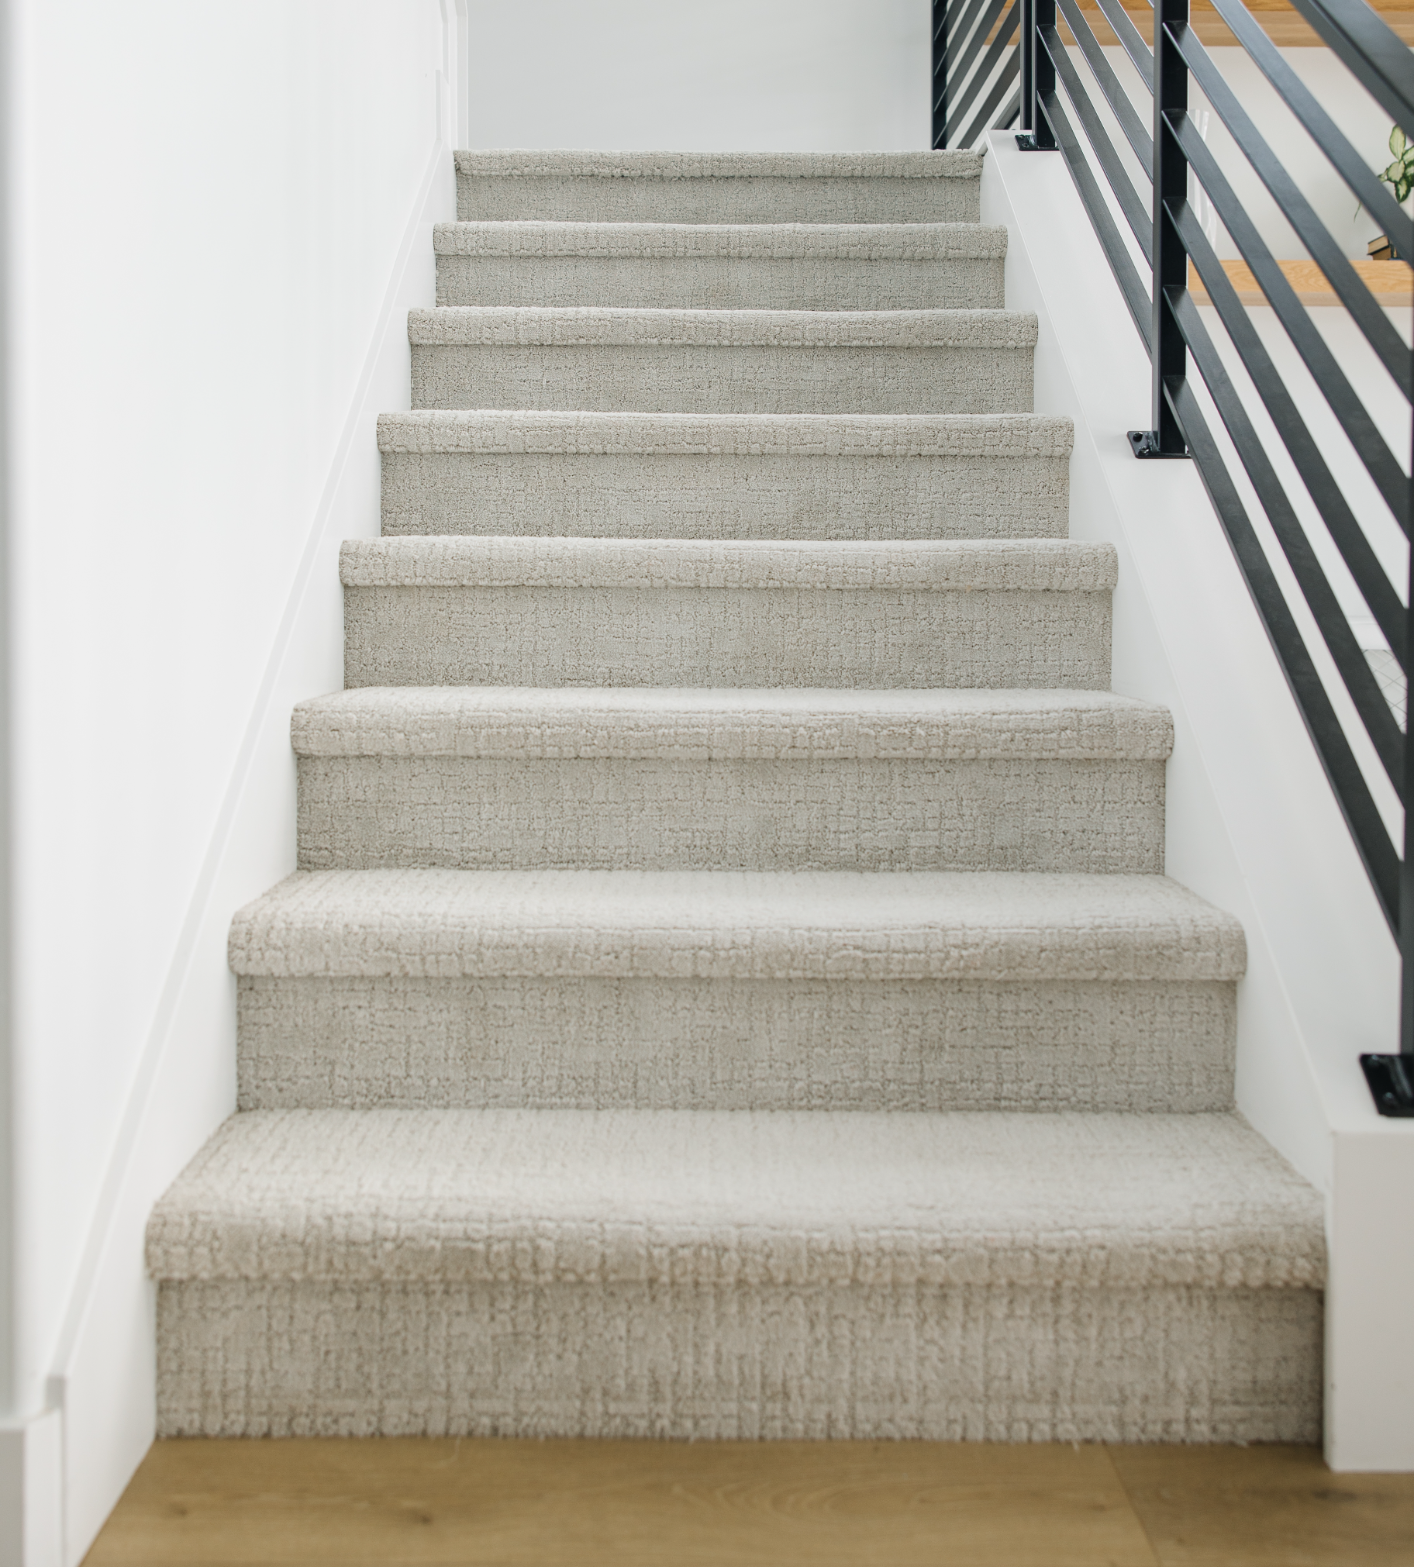 carpeted stairs with a black metal railing on the right side in need of carpet cleaning edges on stair